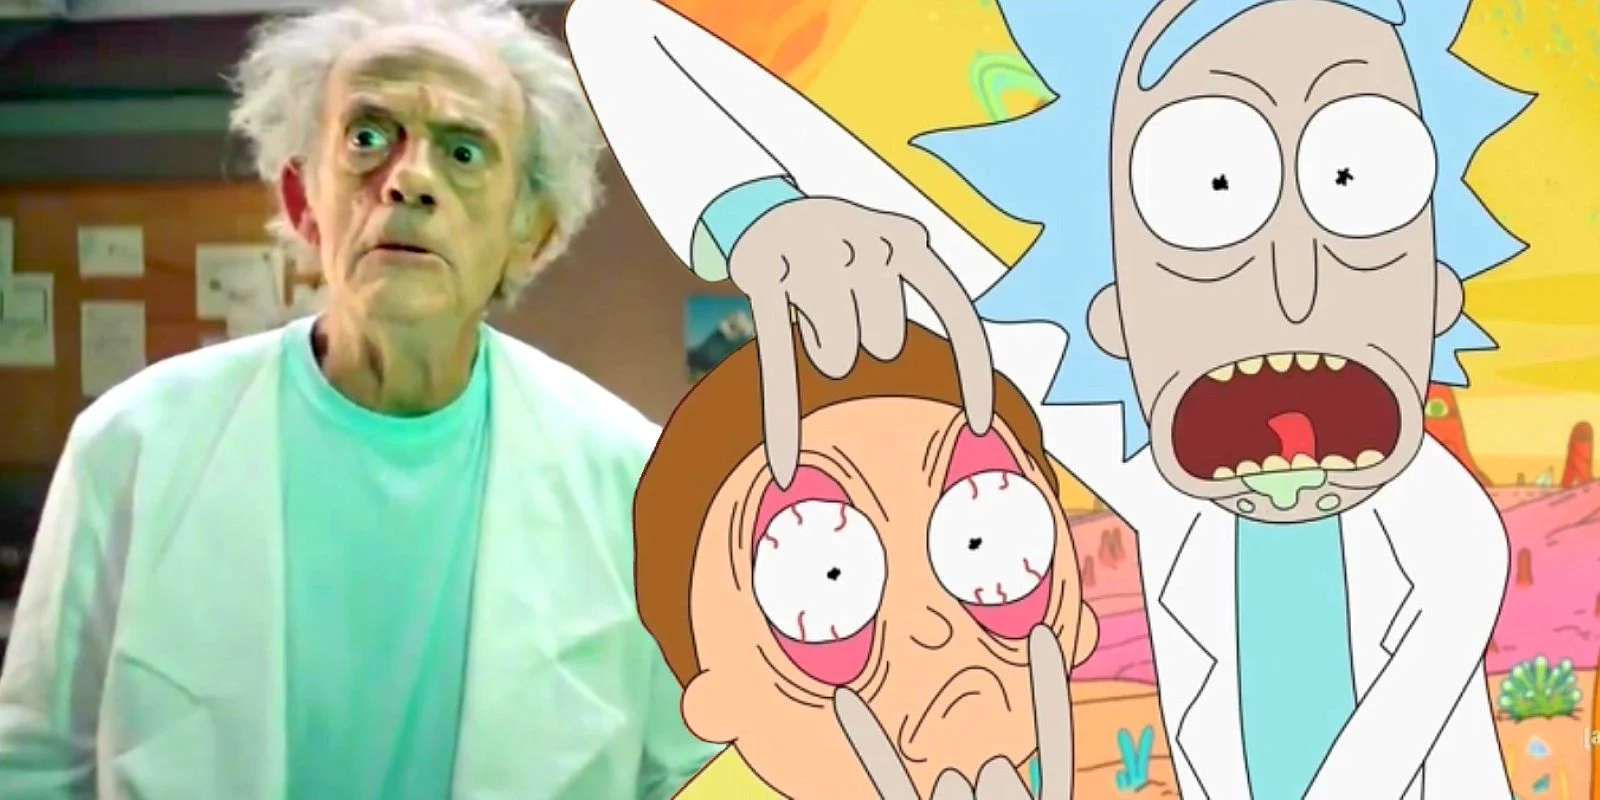 voice acting rick and morty